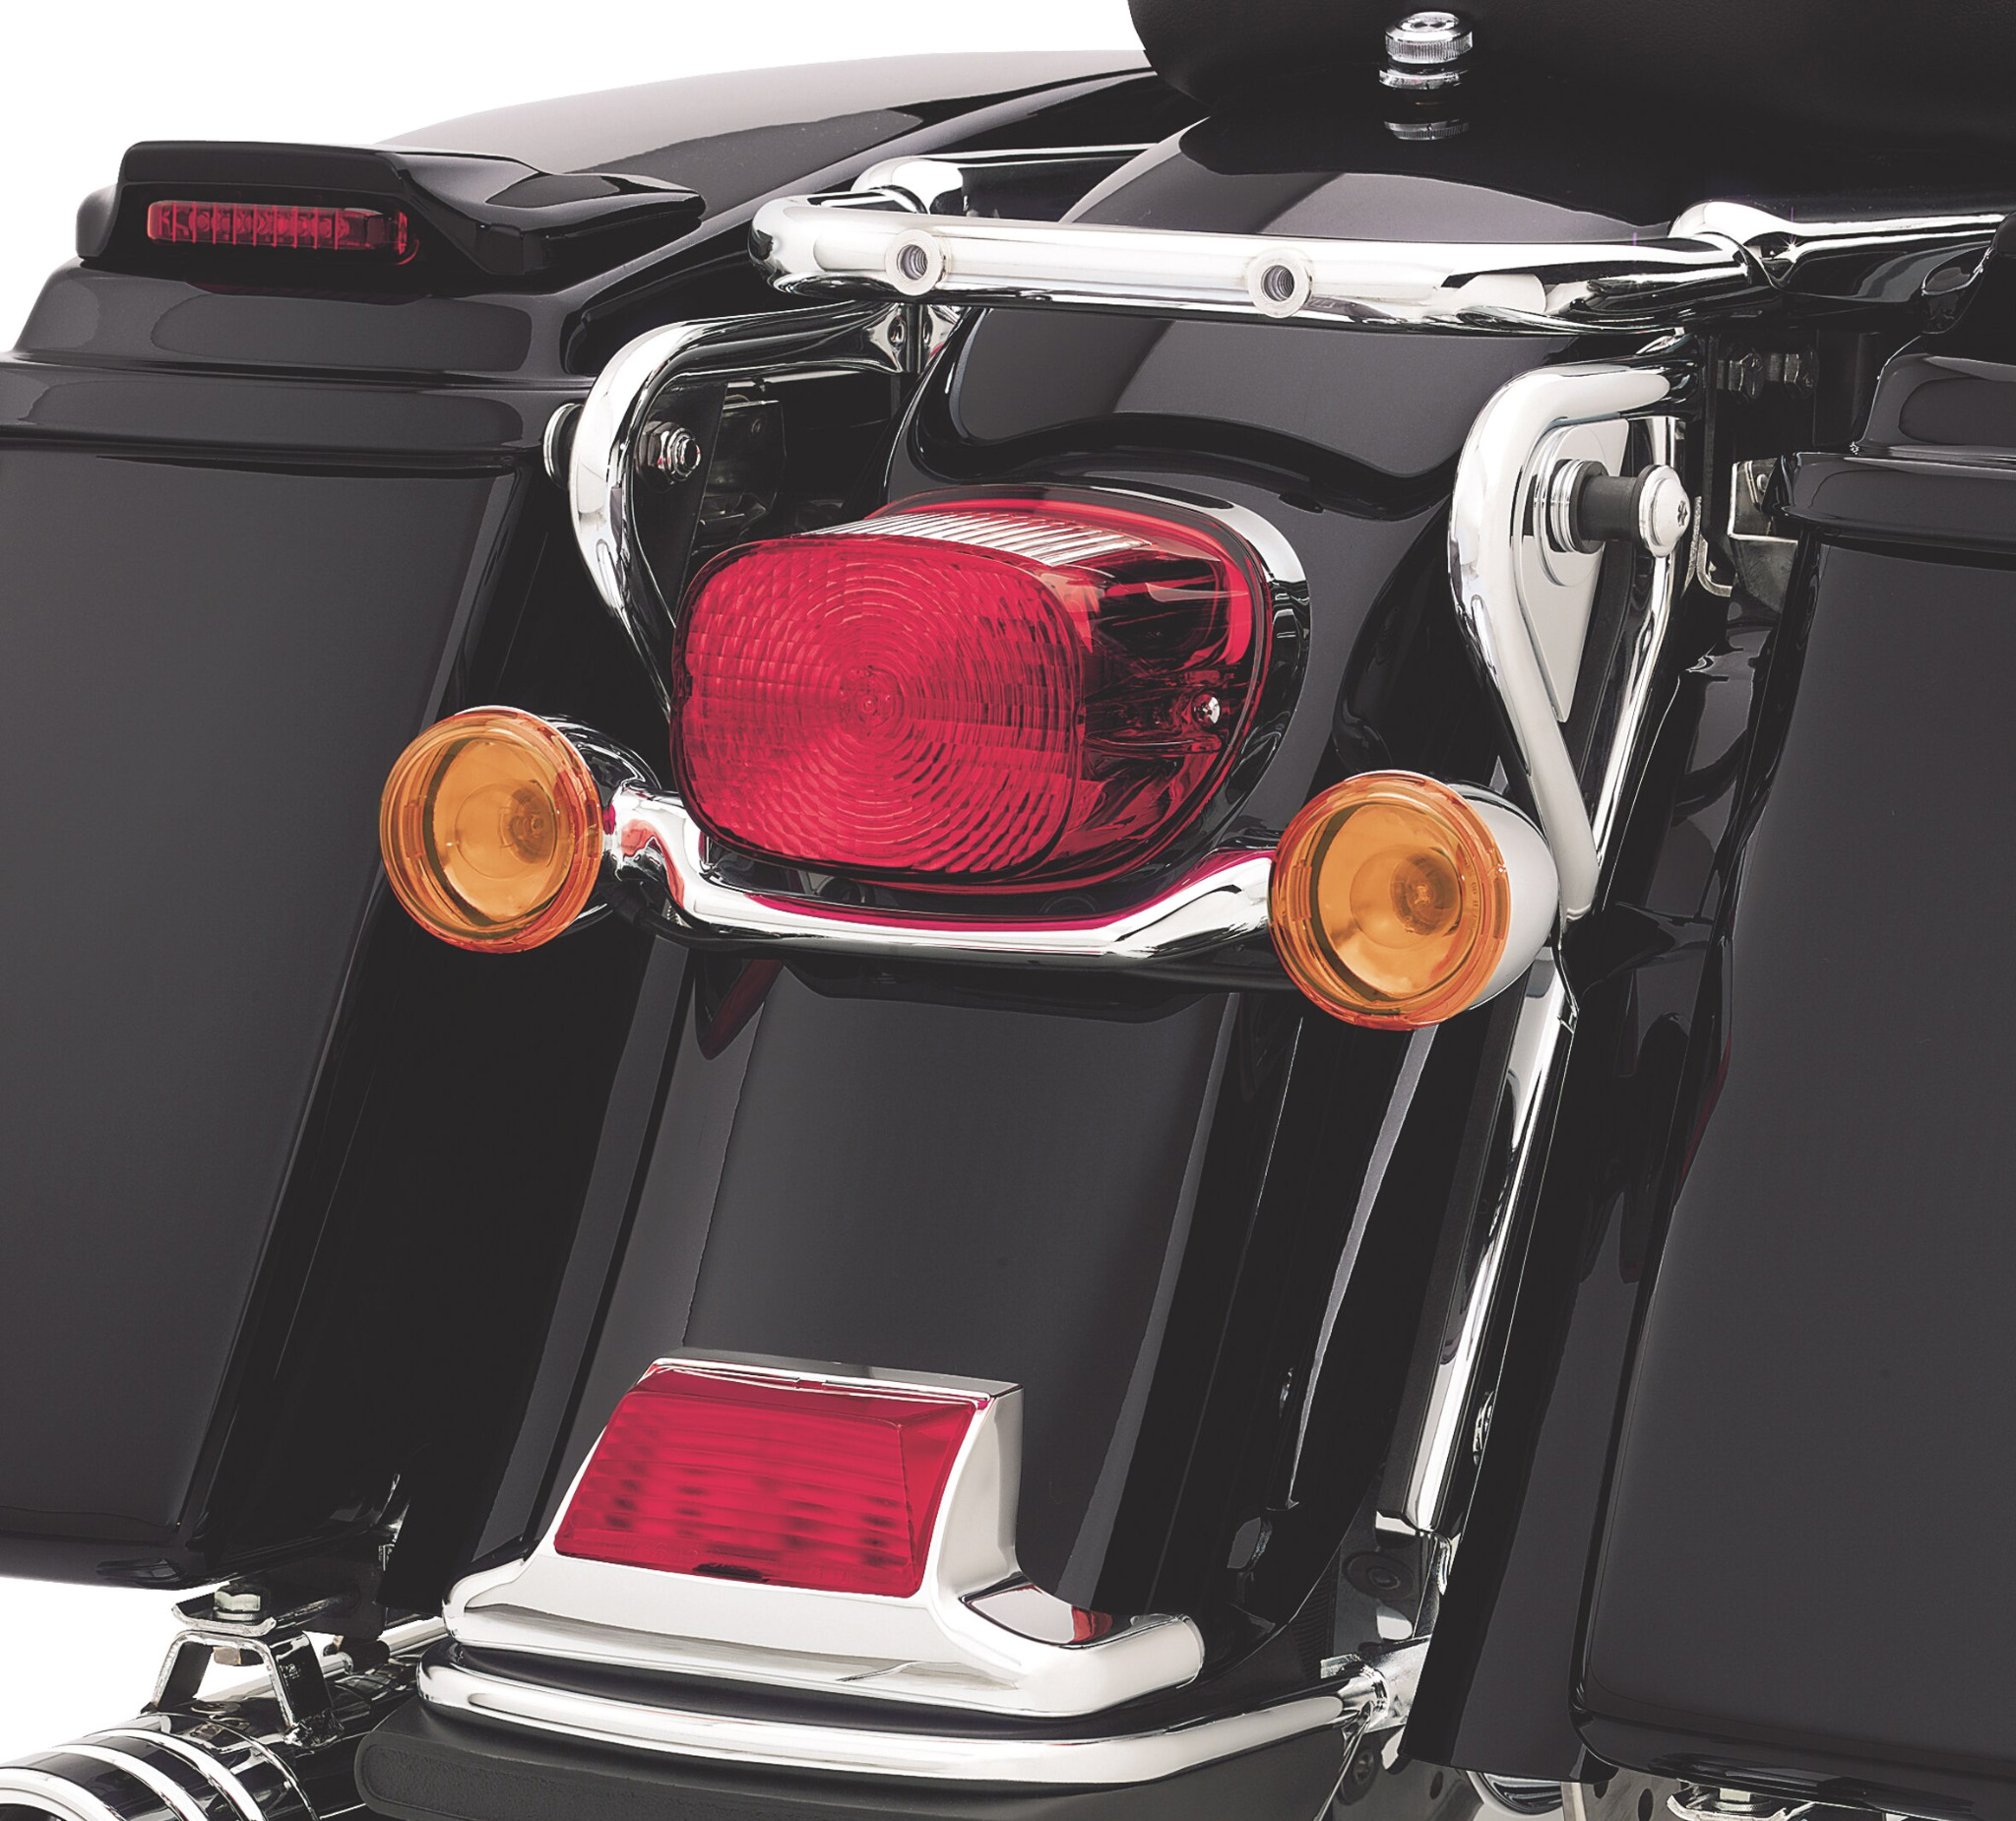 Tail break with turn signal Light for Harley Dyna Electra FLST Road King Glide 